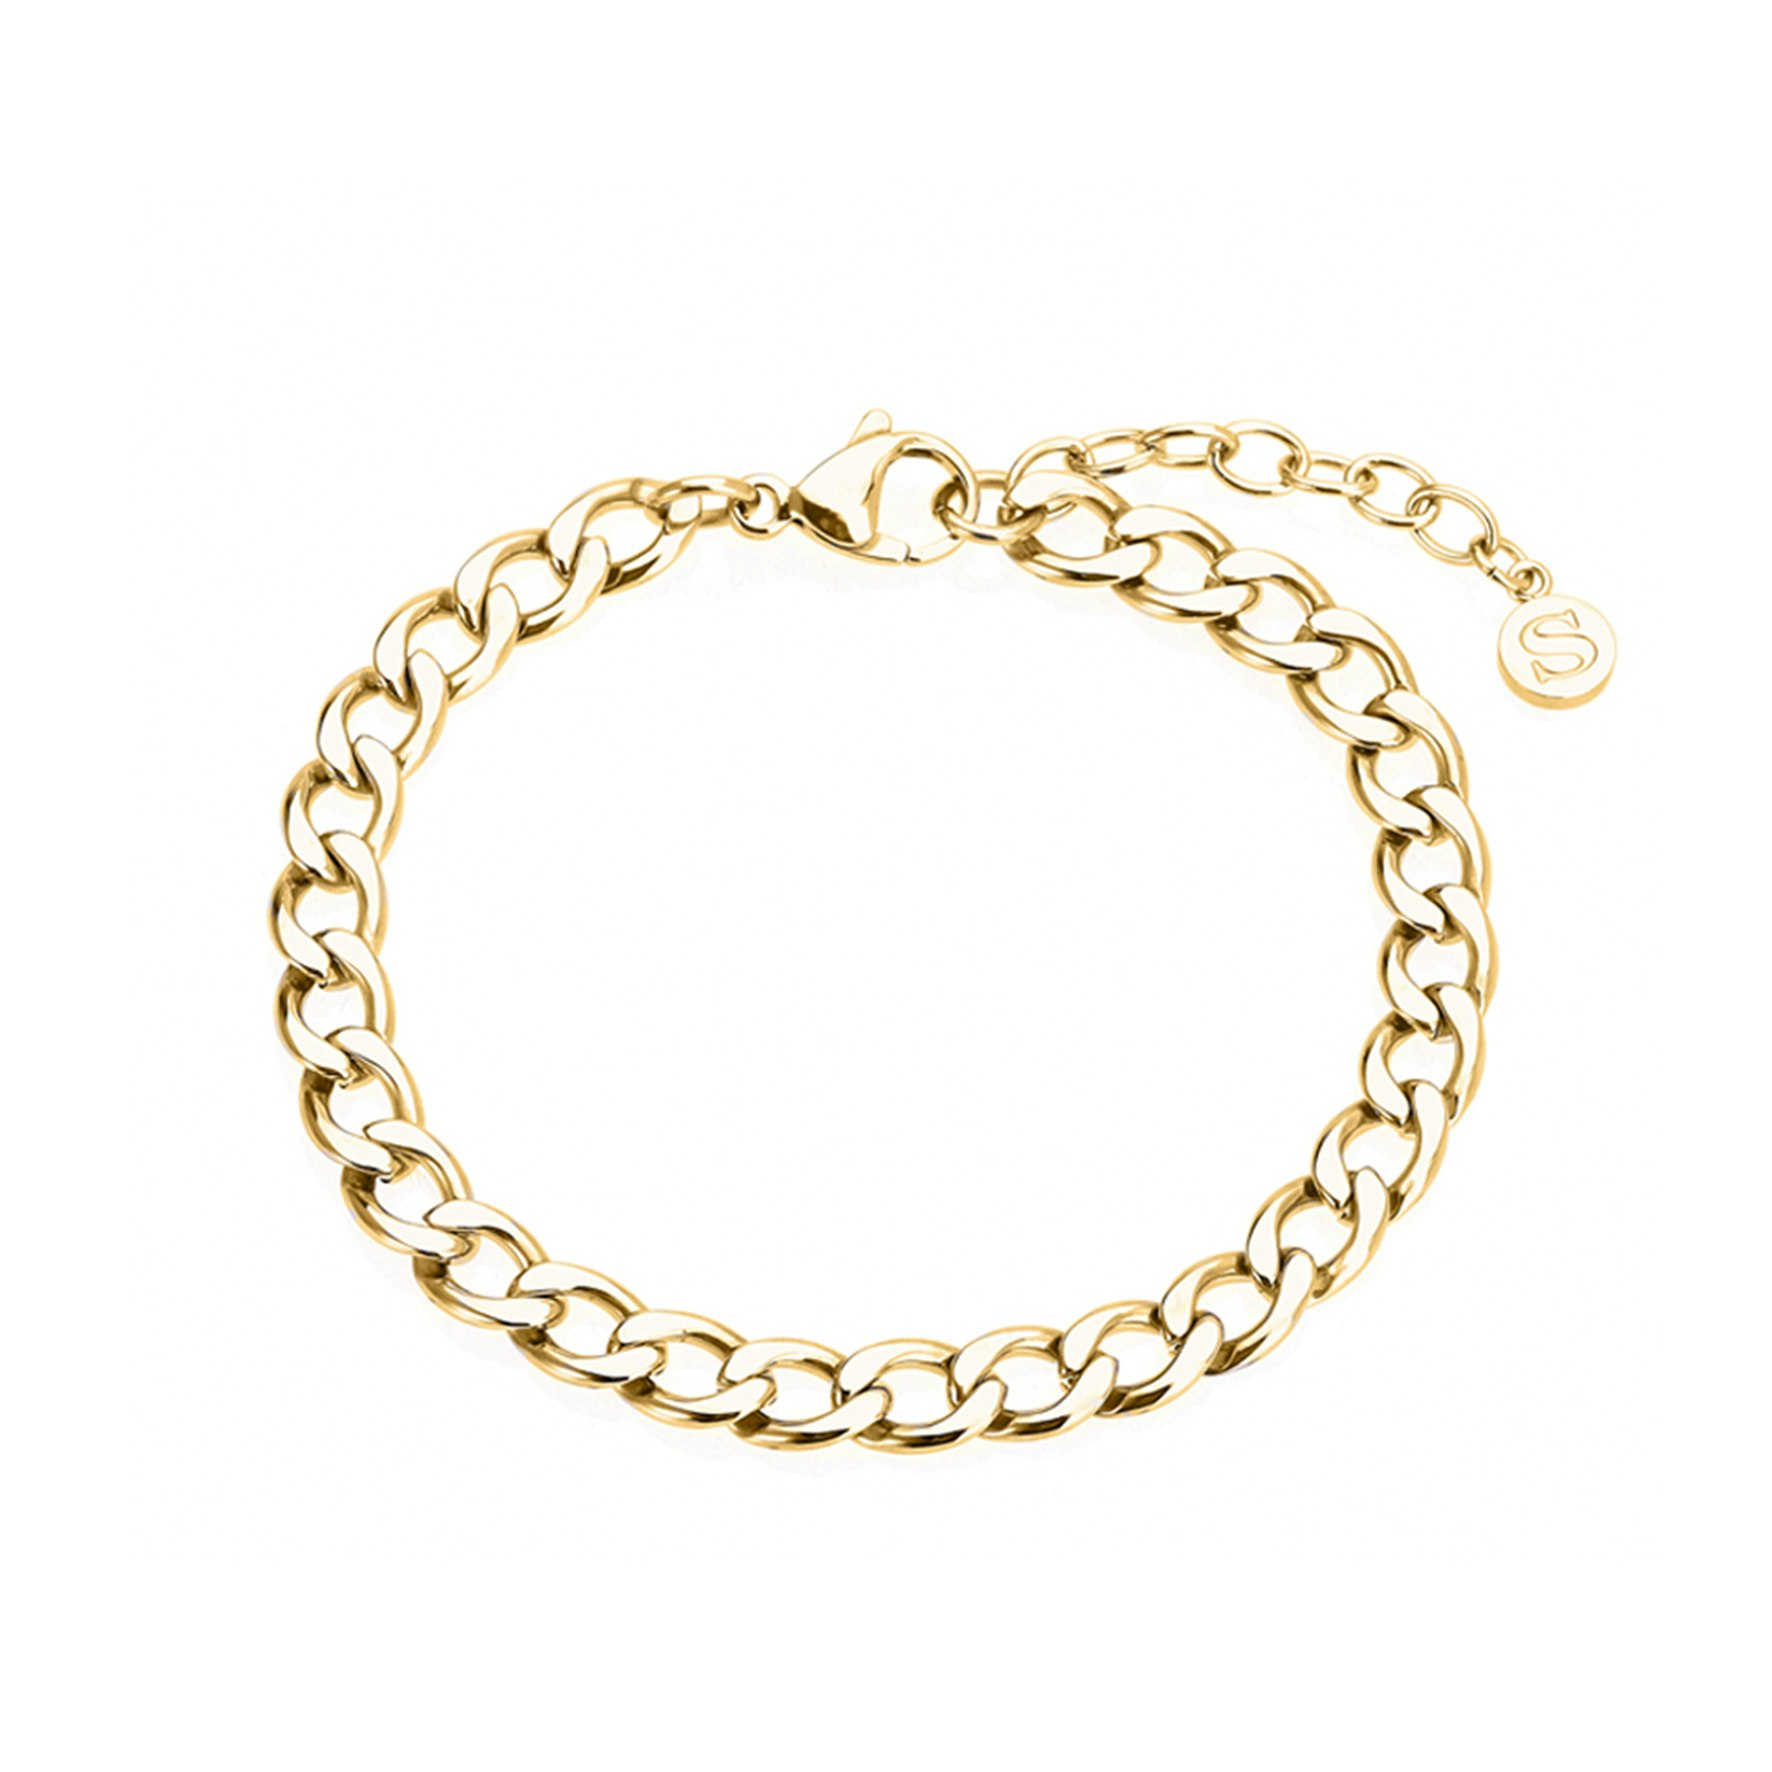 Panzer Bracelet from Sistie 2nd in Goldplated stainless steel